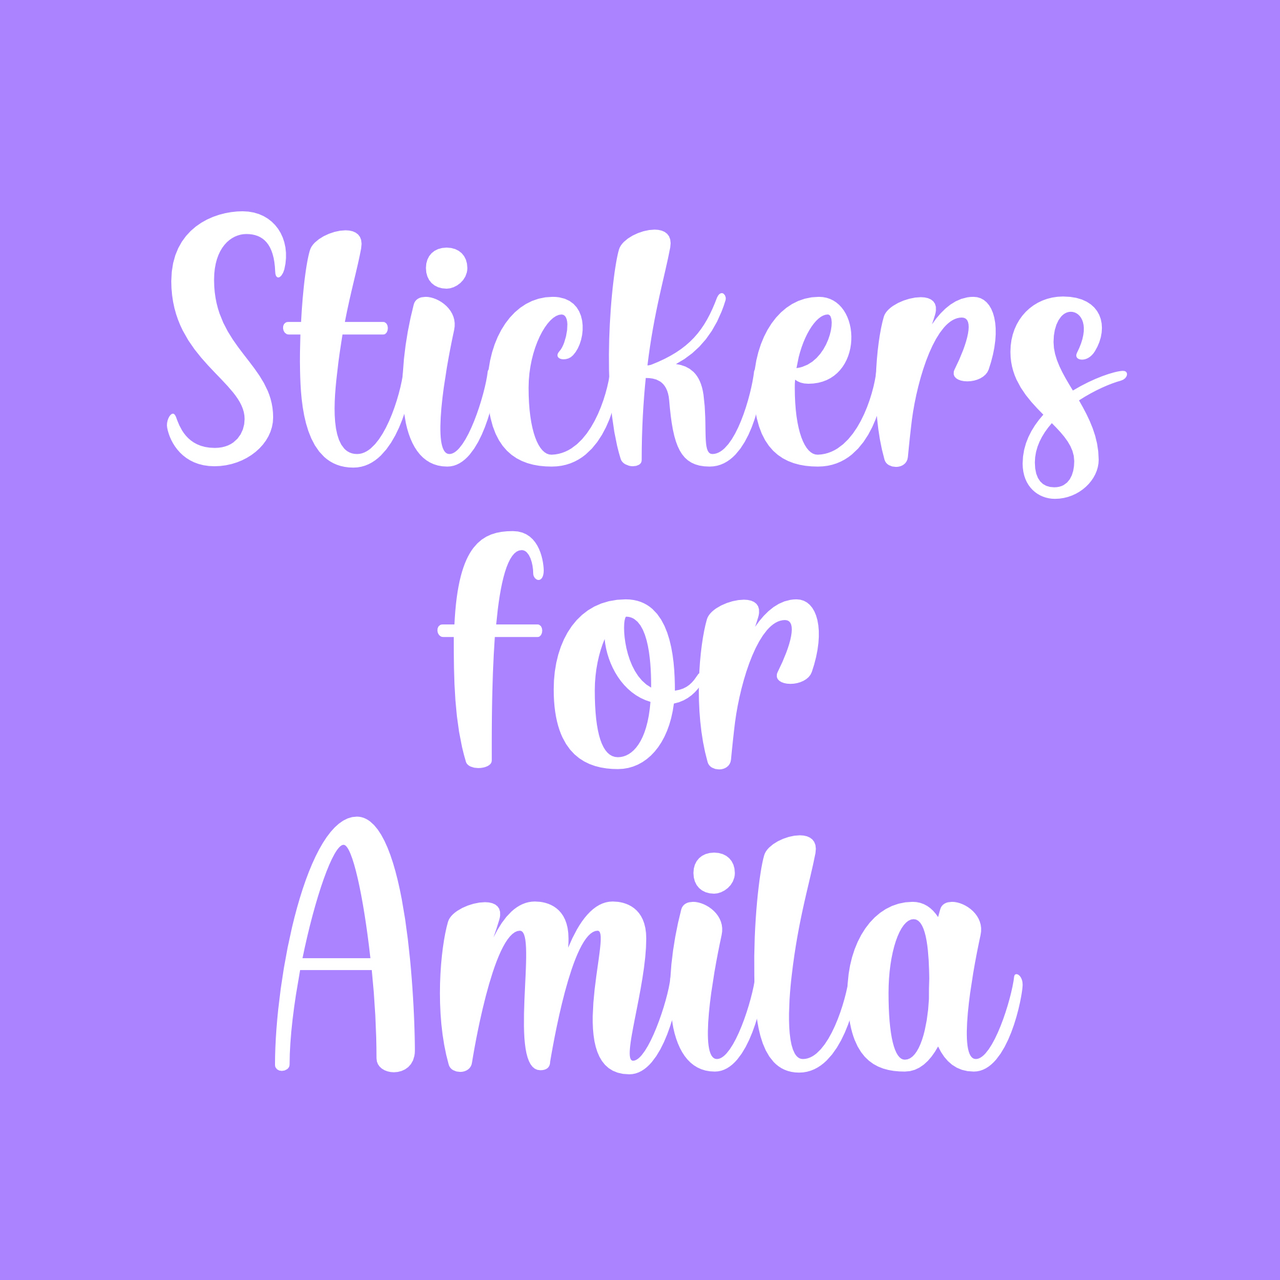 Stickers for Amila